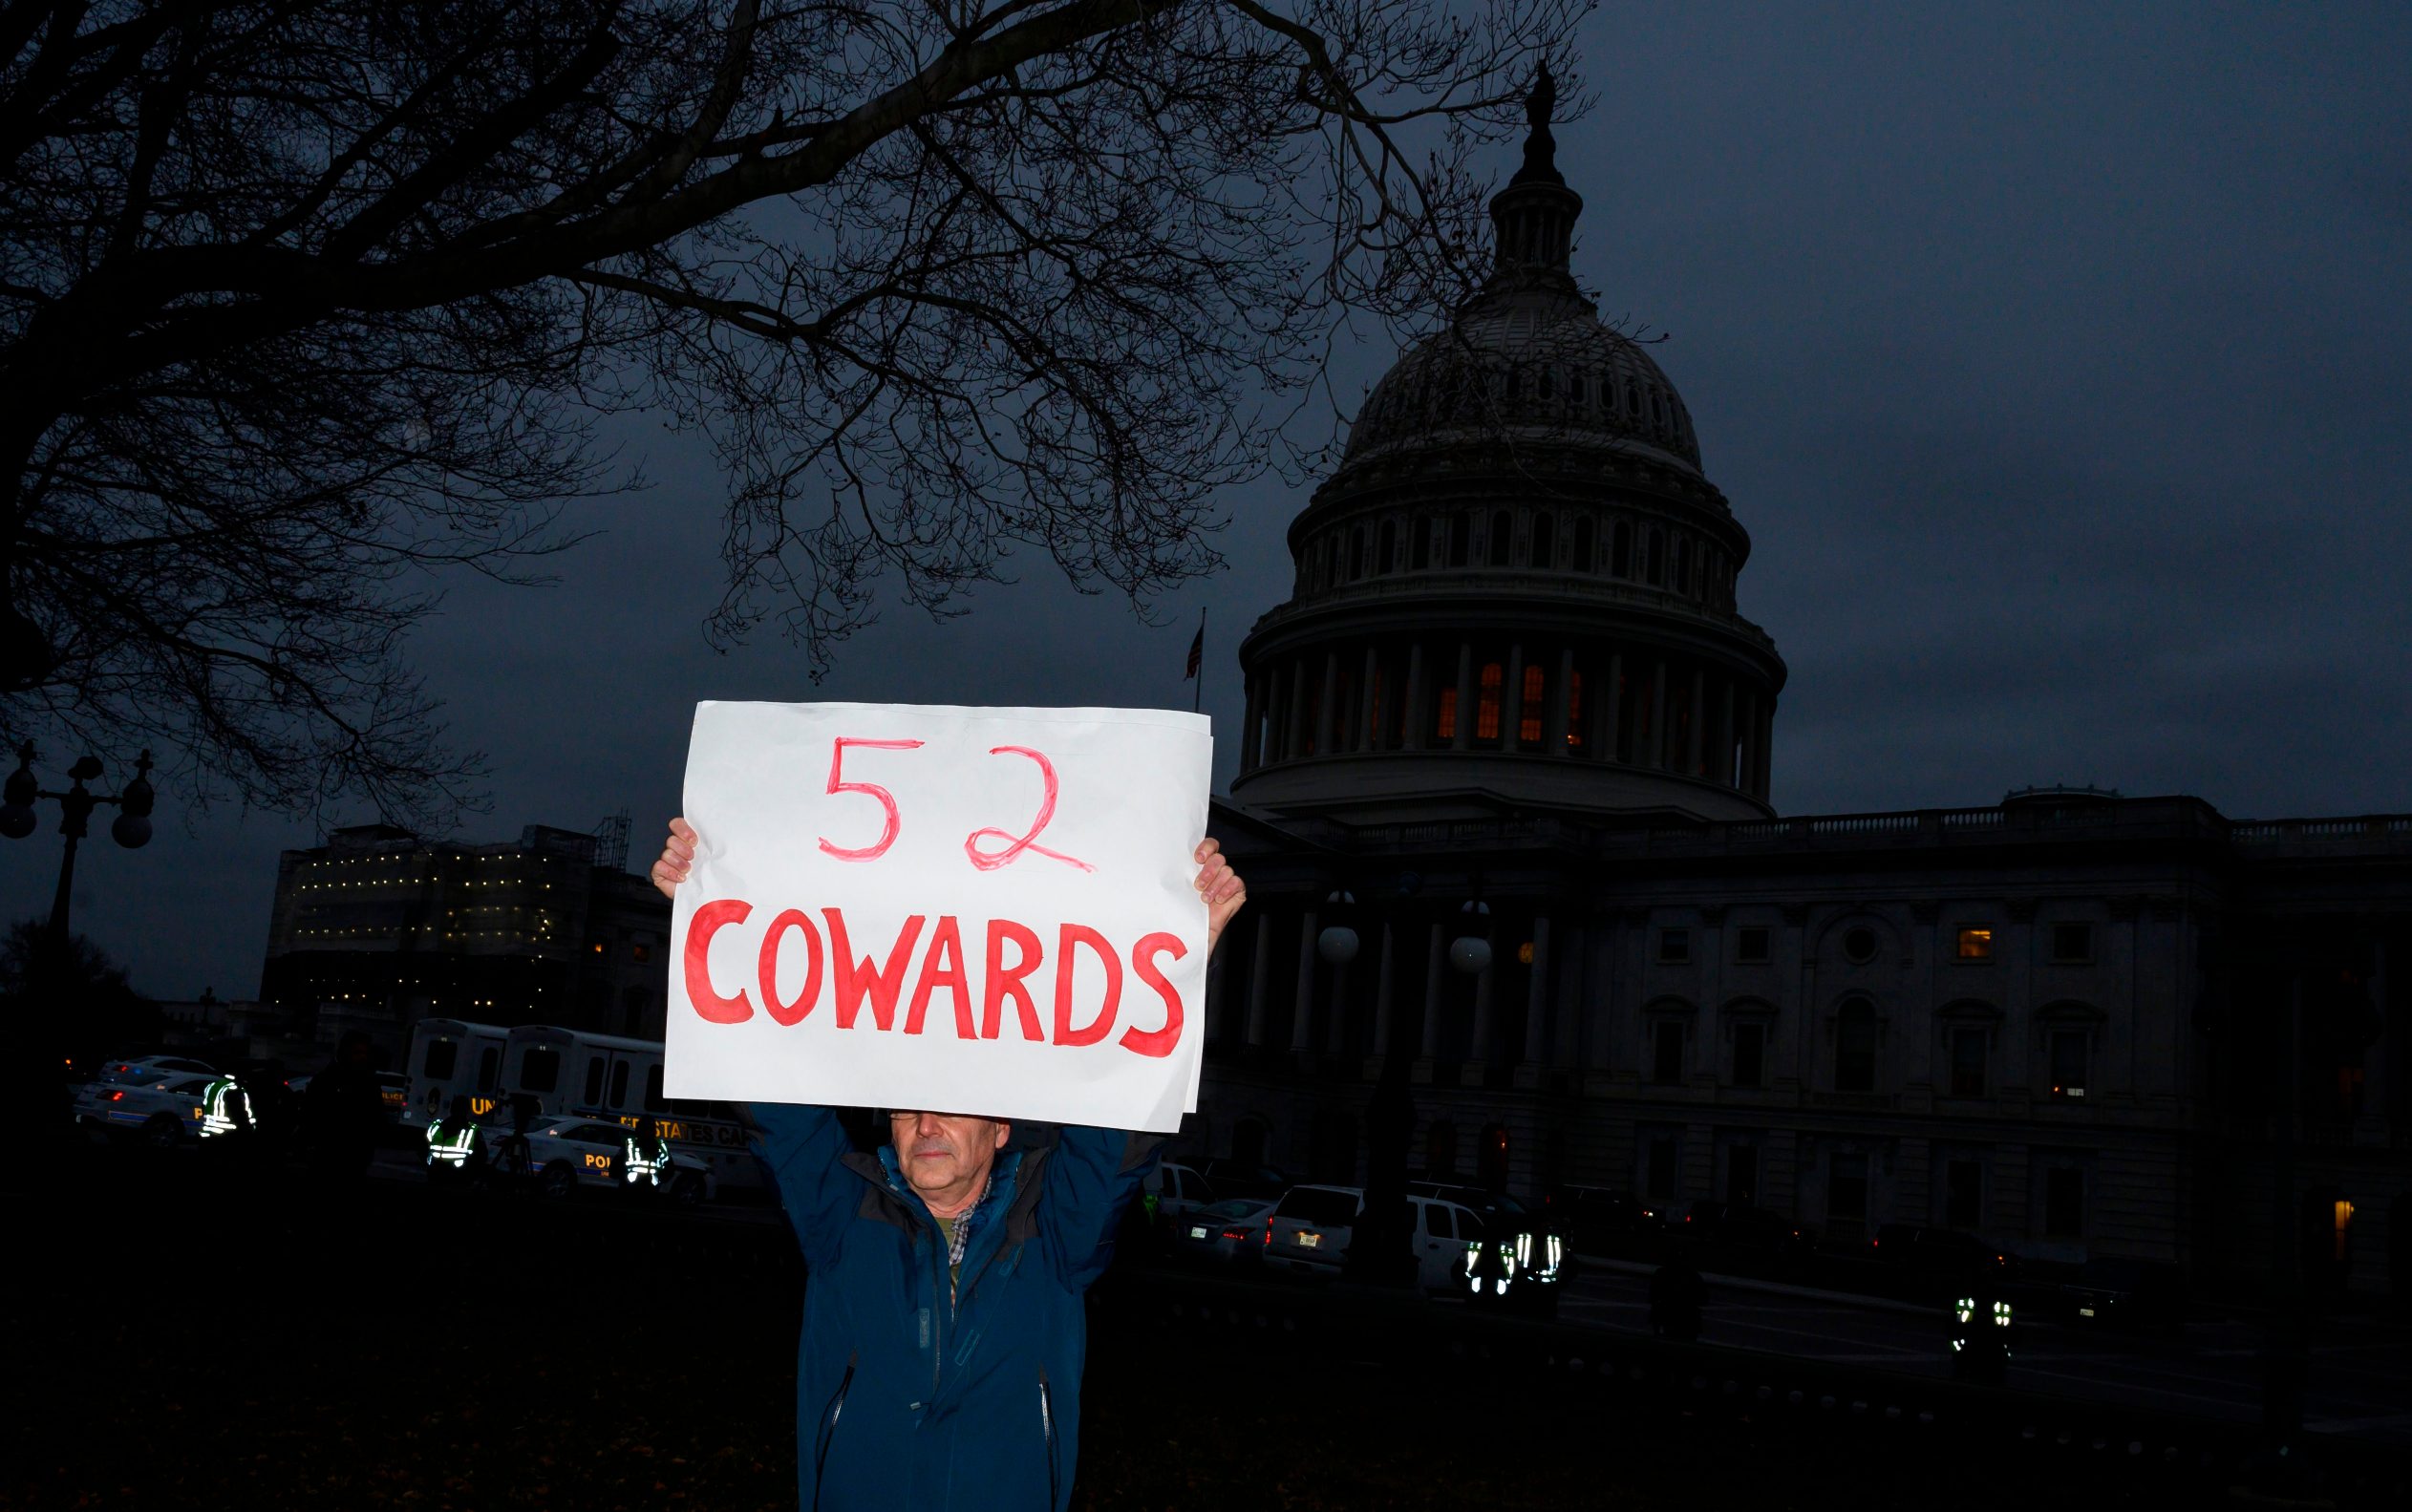 A protester holds up a sign outside the Capitol in Washington, DC, on February 5, 2020, after the US Senate acquited the US president in his impeachment trial. - The US Senate acquitted President Donald Trump of abuse of power and obstruction of Congress following a historic two-week trial. (Photo by Andrew CABALLERO-REYNOLDS / AFP)